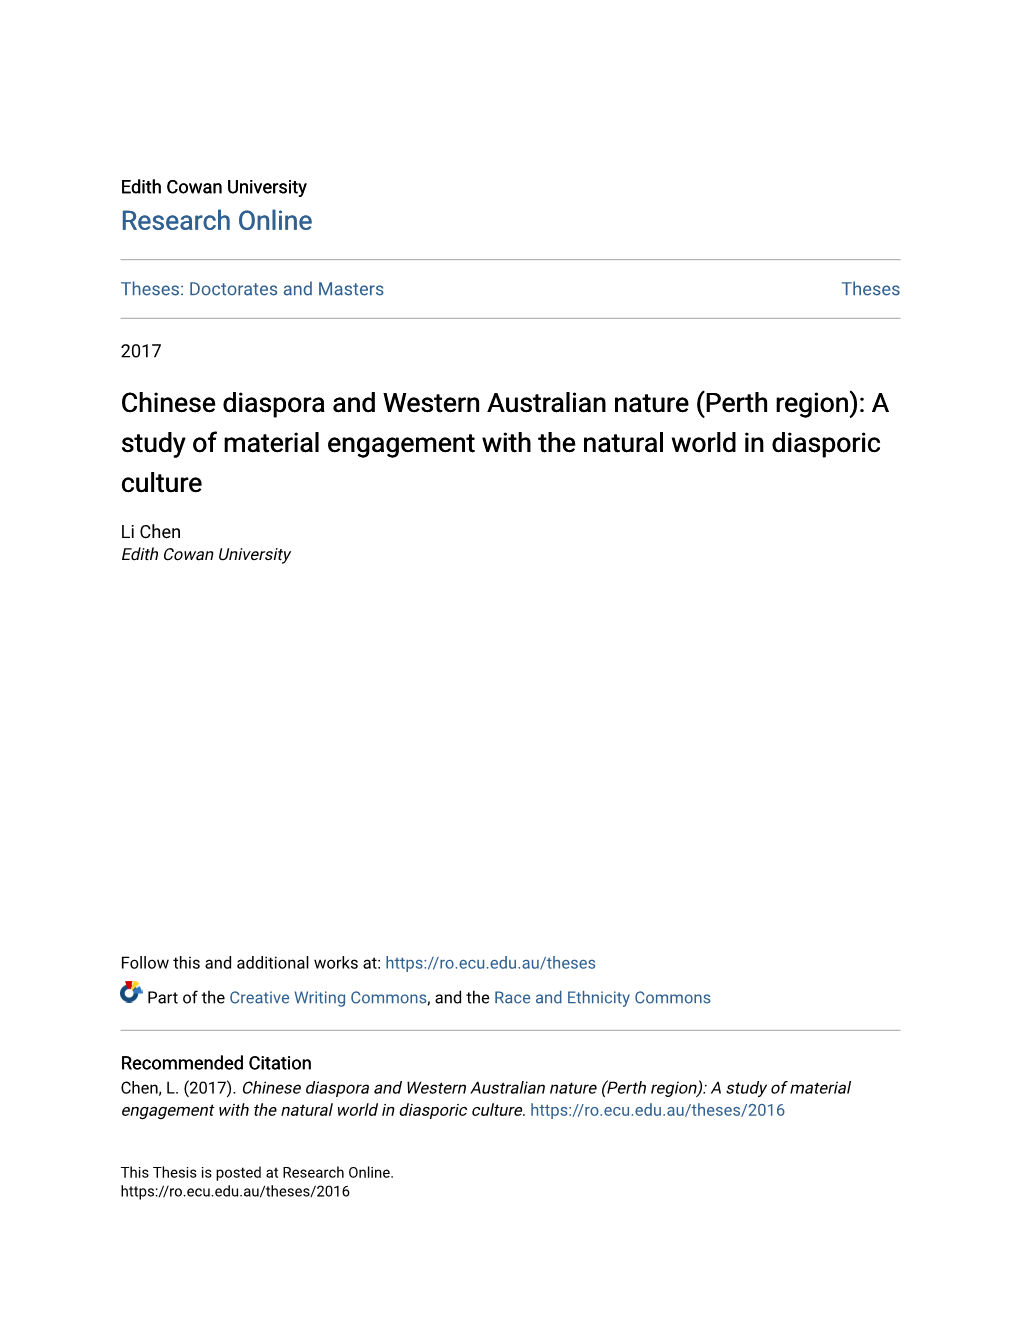 Chinese Diaspora and Western Australian Nature (Perth Region): a Study of Material Engagement with the Natural World in Diasporic Culture